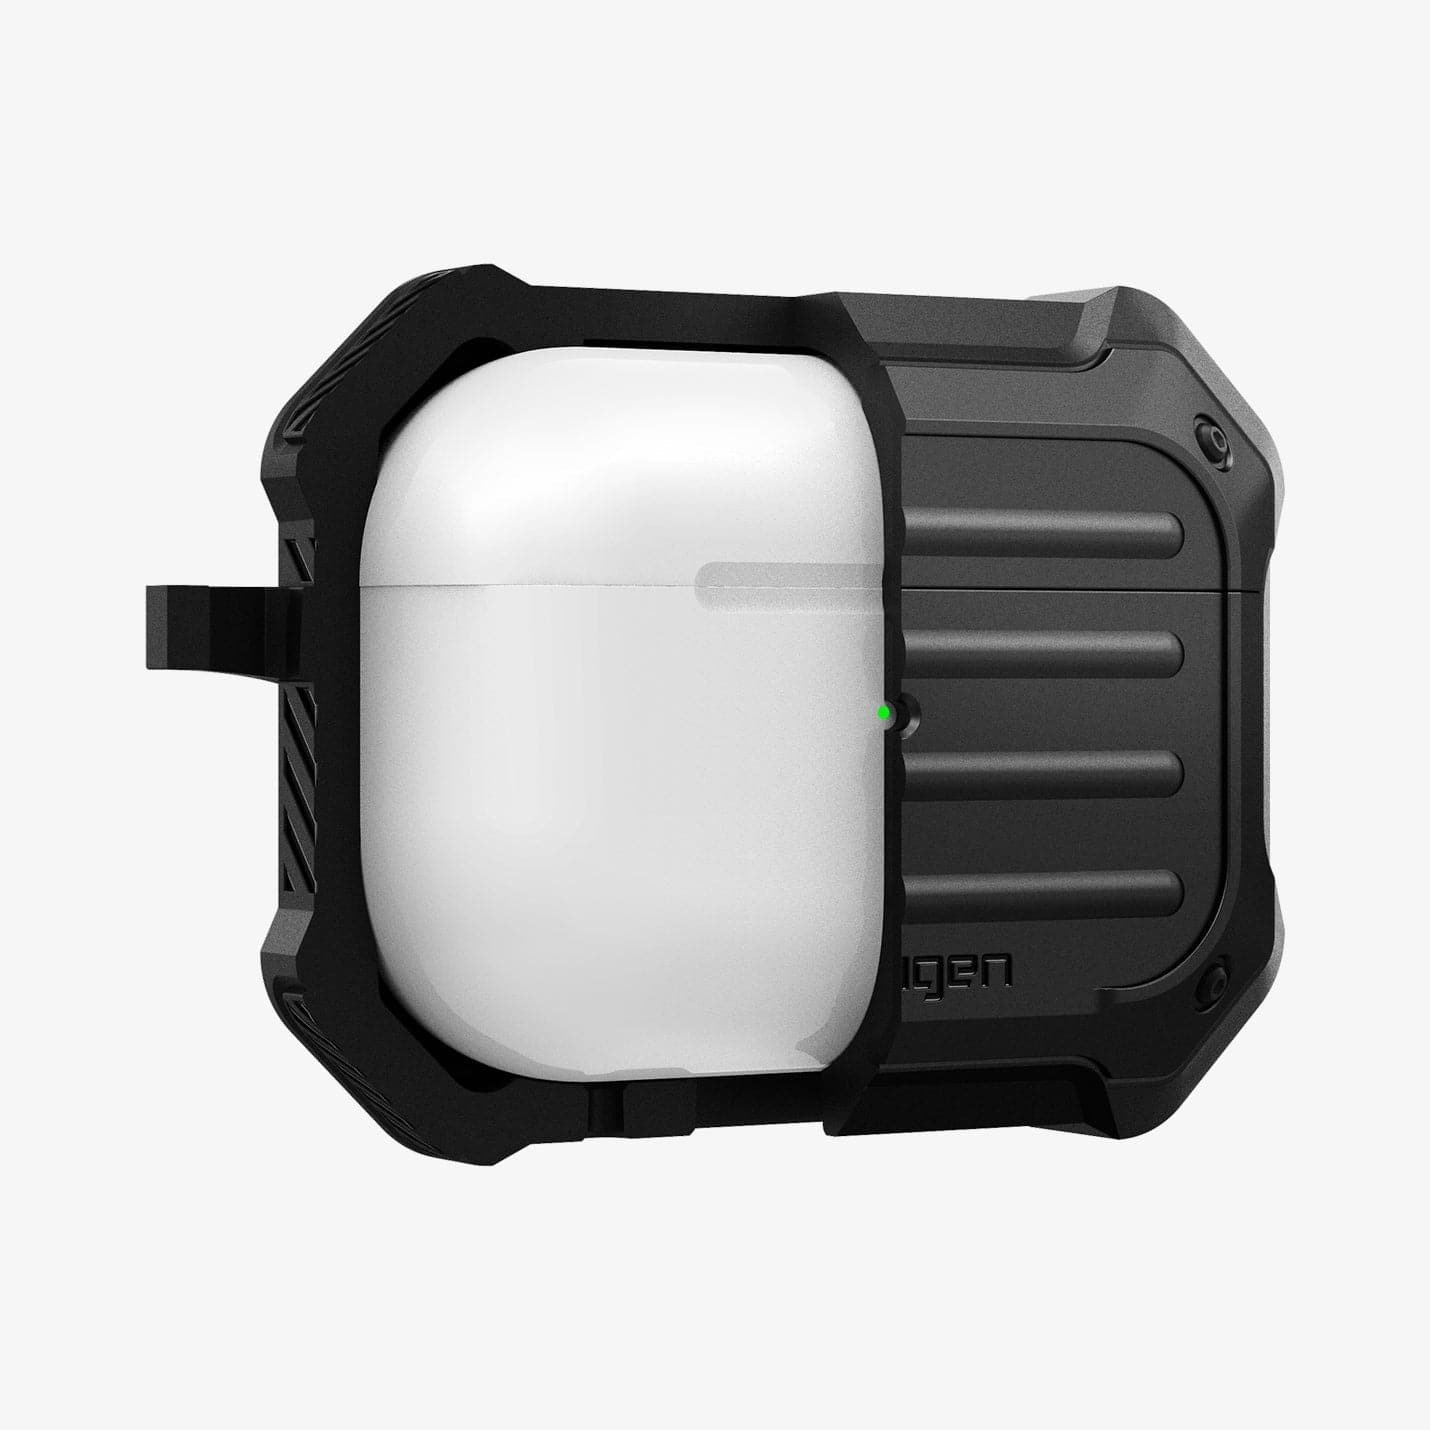 ACS05480 - Apple AirPods Pro 2 Case Tough Armor in black showing the front with case cut half open